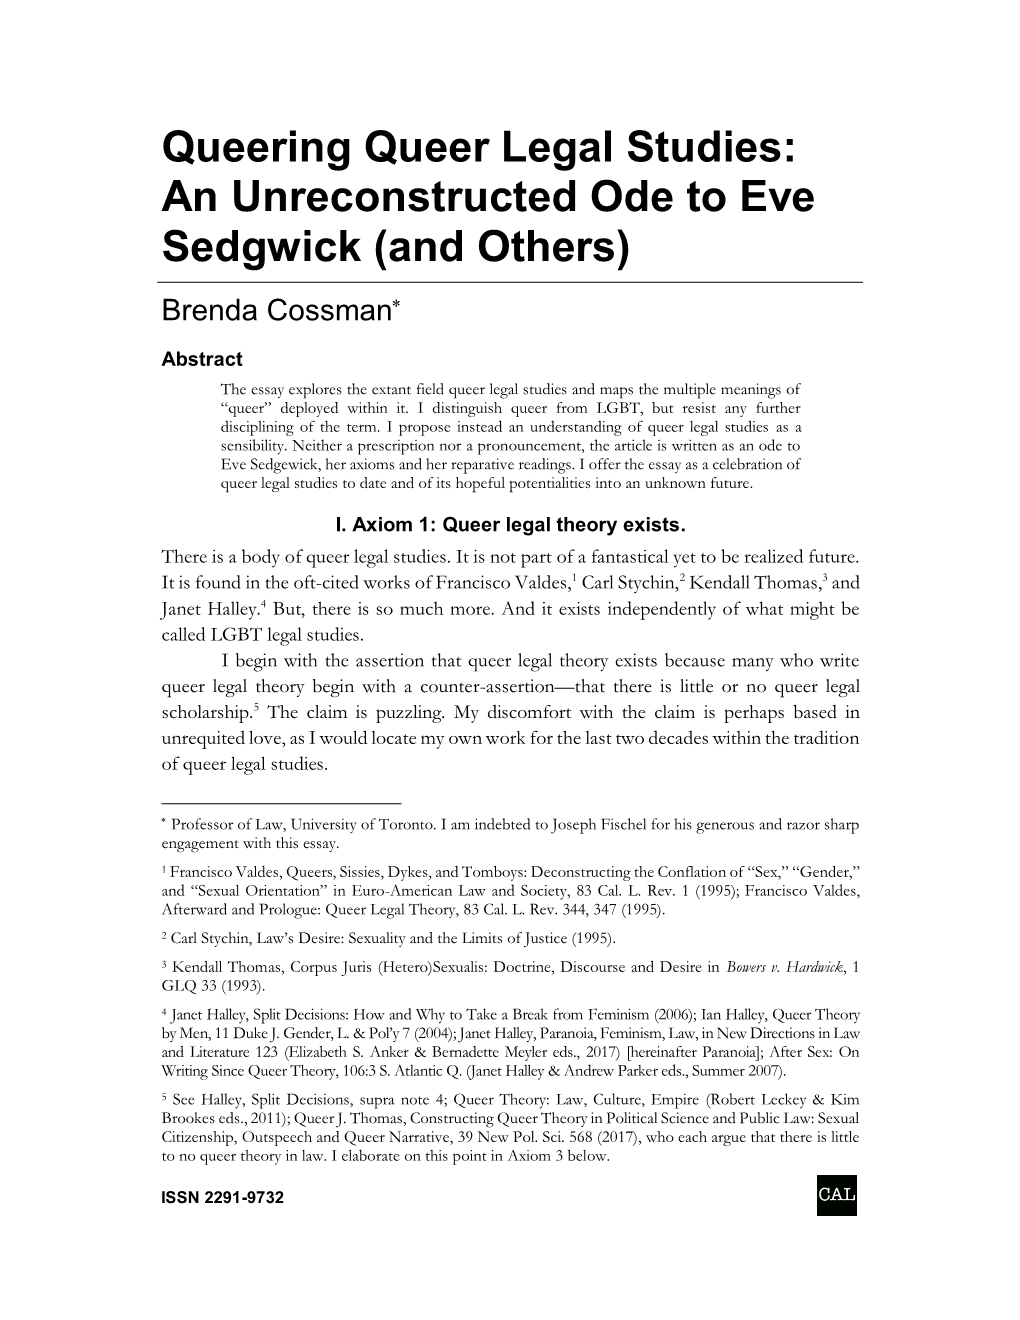 An Unreconstructed Ode to Eve Sedgwick (And Others) Brenda Cossman